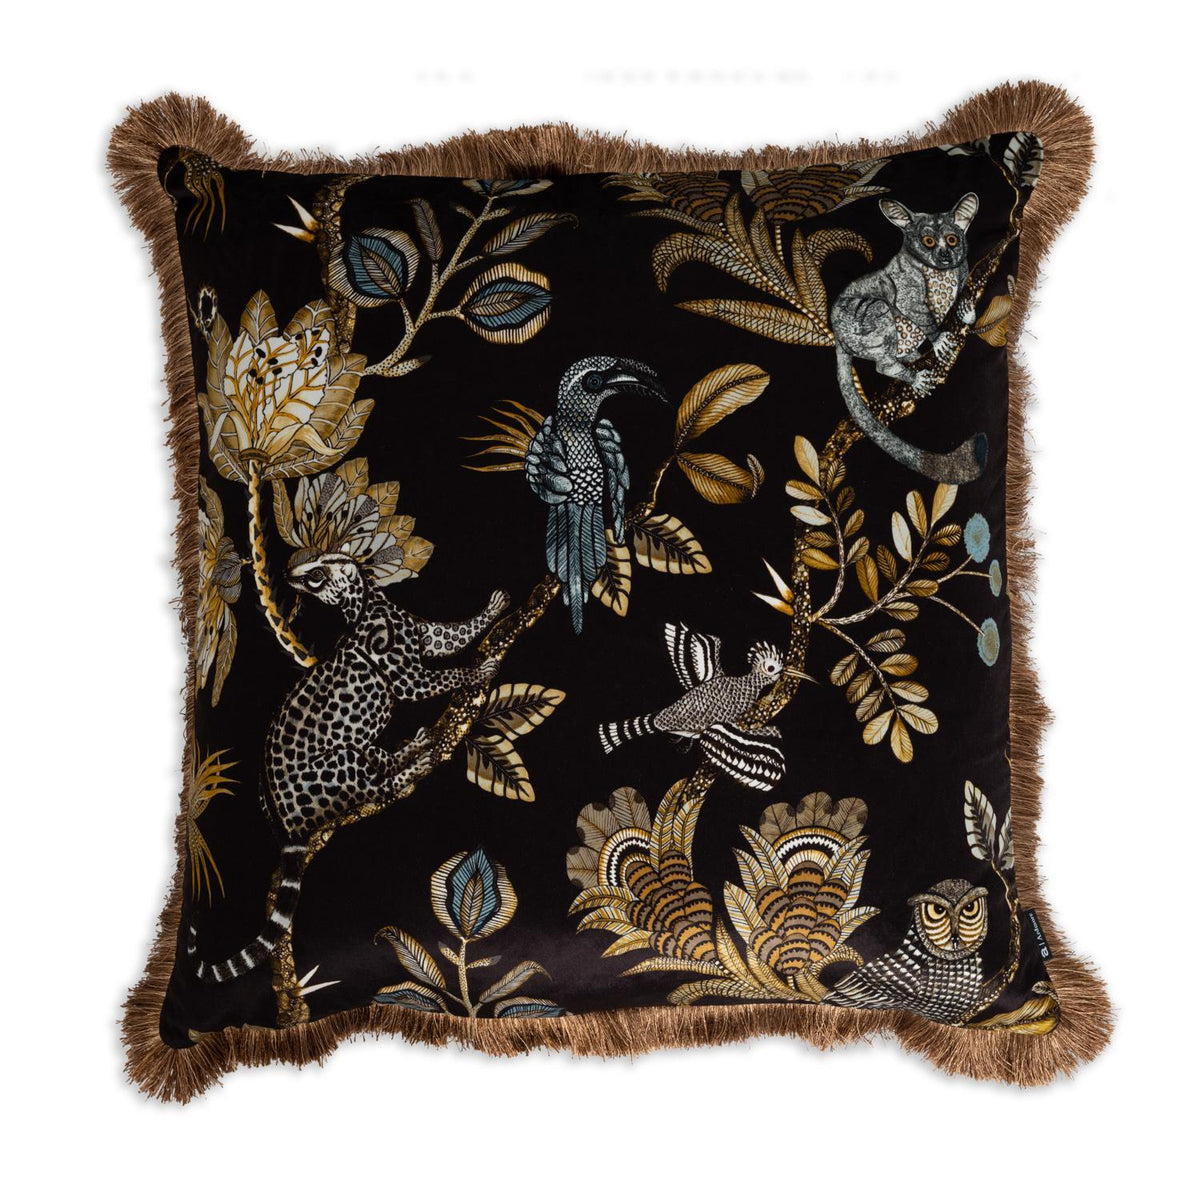 Amaranth & Velvet Folktales Cushion from House of Ita for sale at Pamono